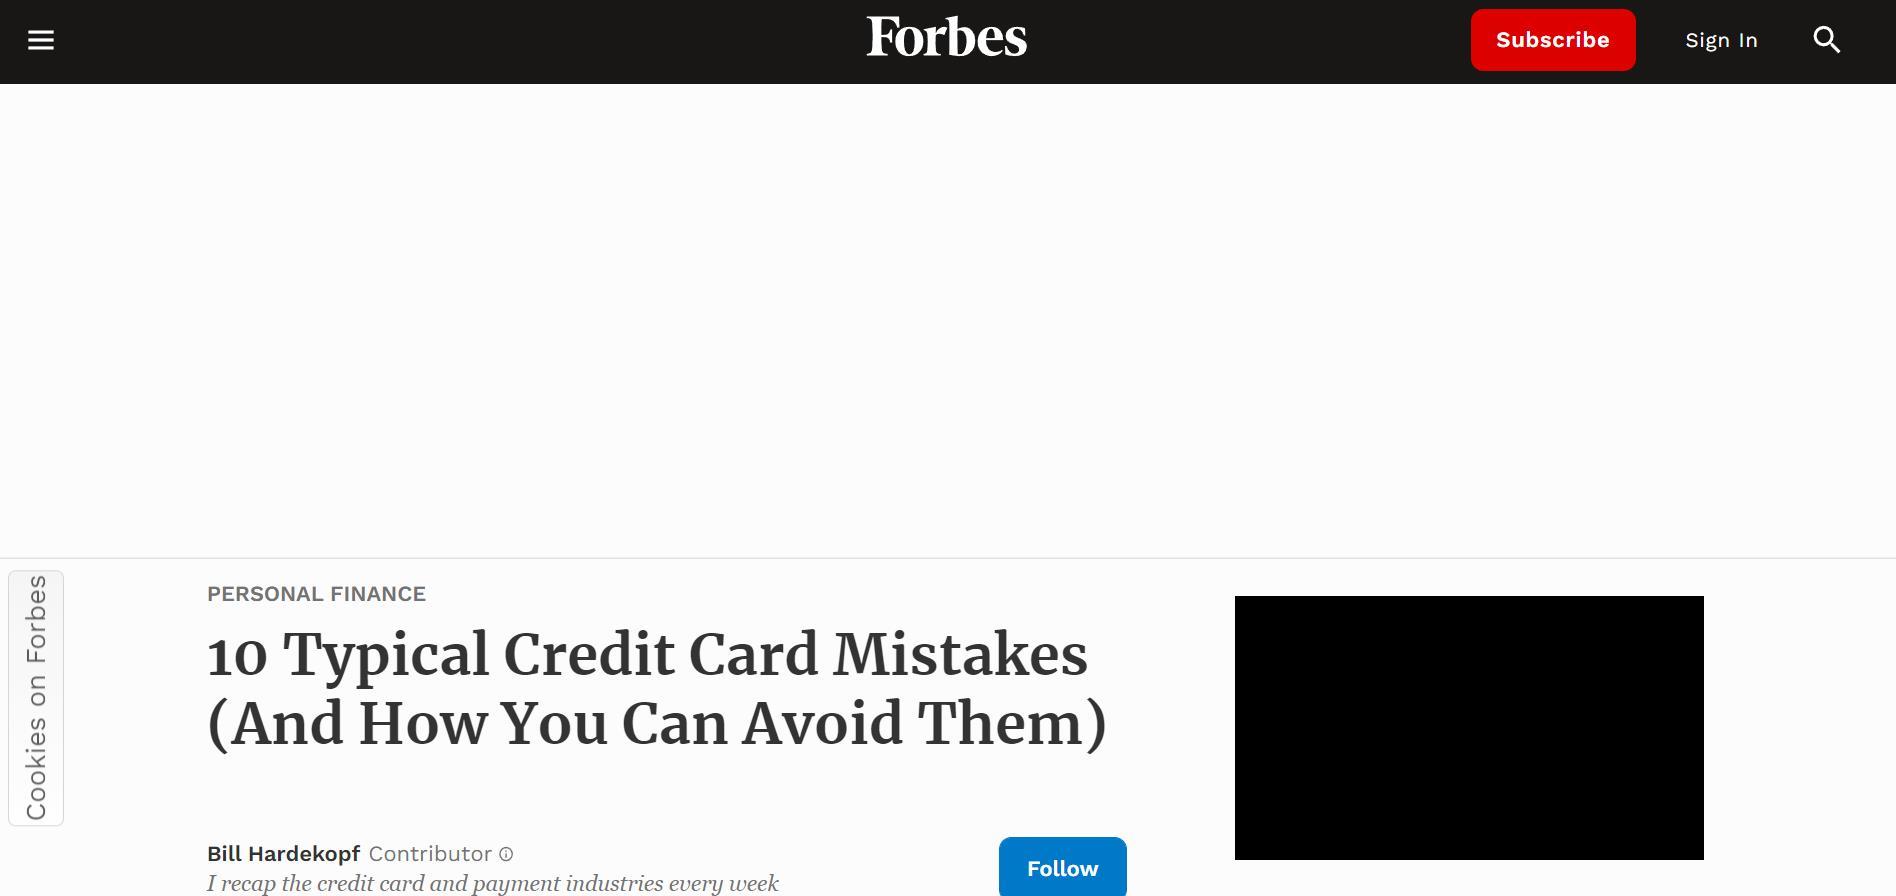 A screenshot of the Forbes homepage with the Surfshark CleanWeb ad blocker turned on. The banner ads at the top of the Forbes site are gone.